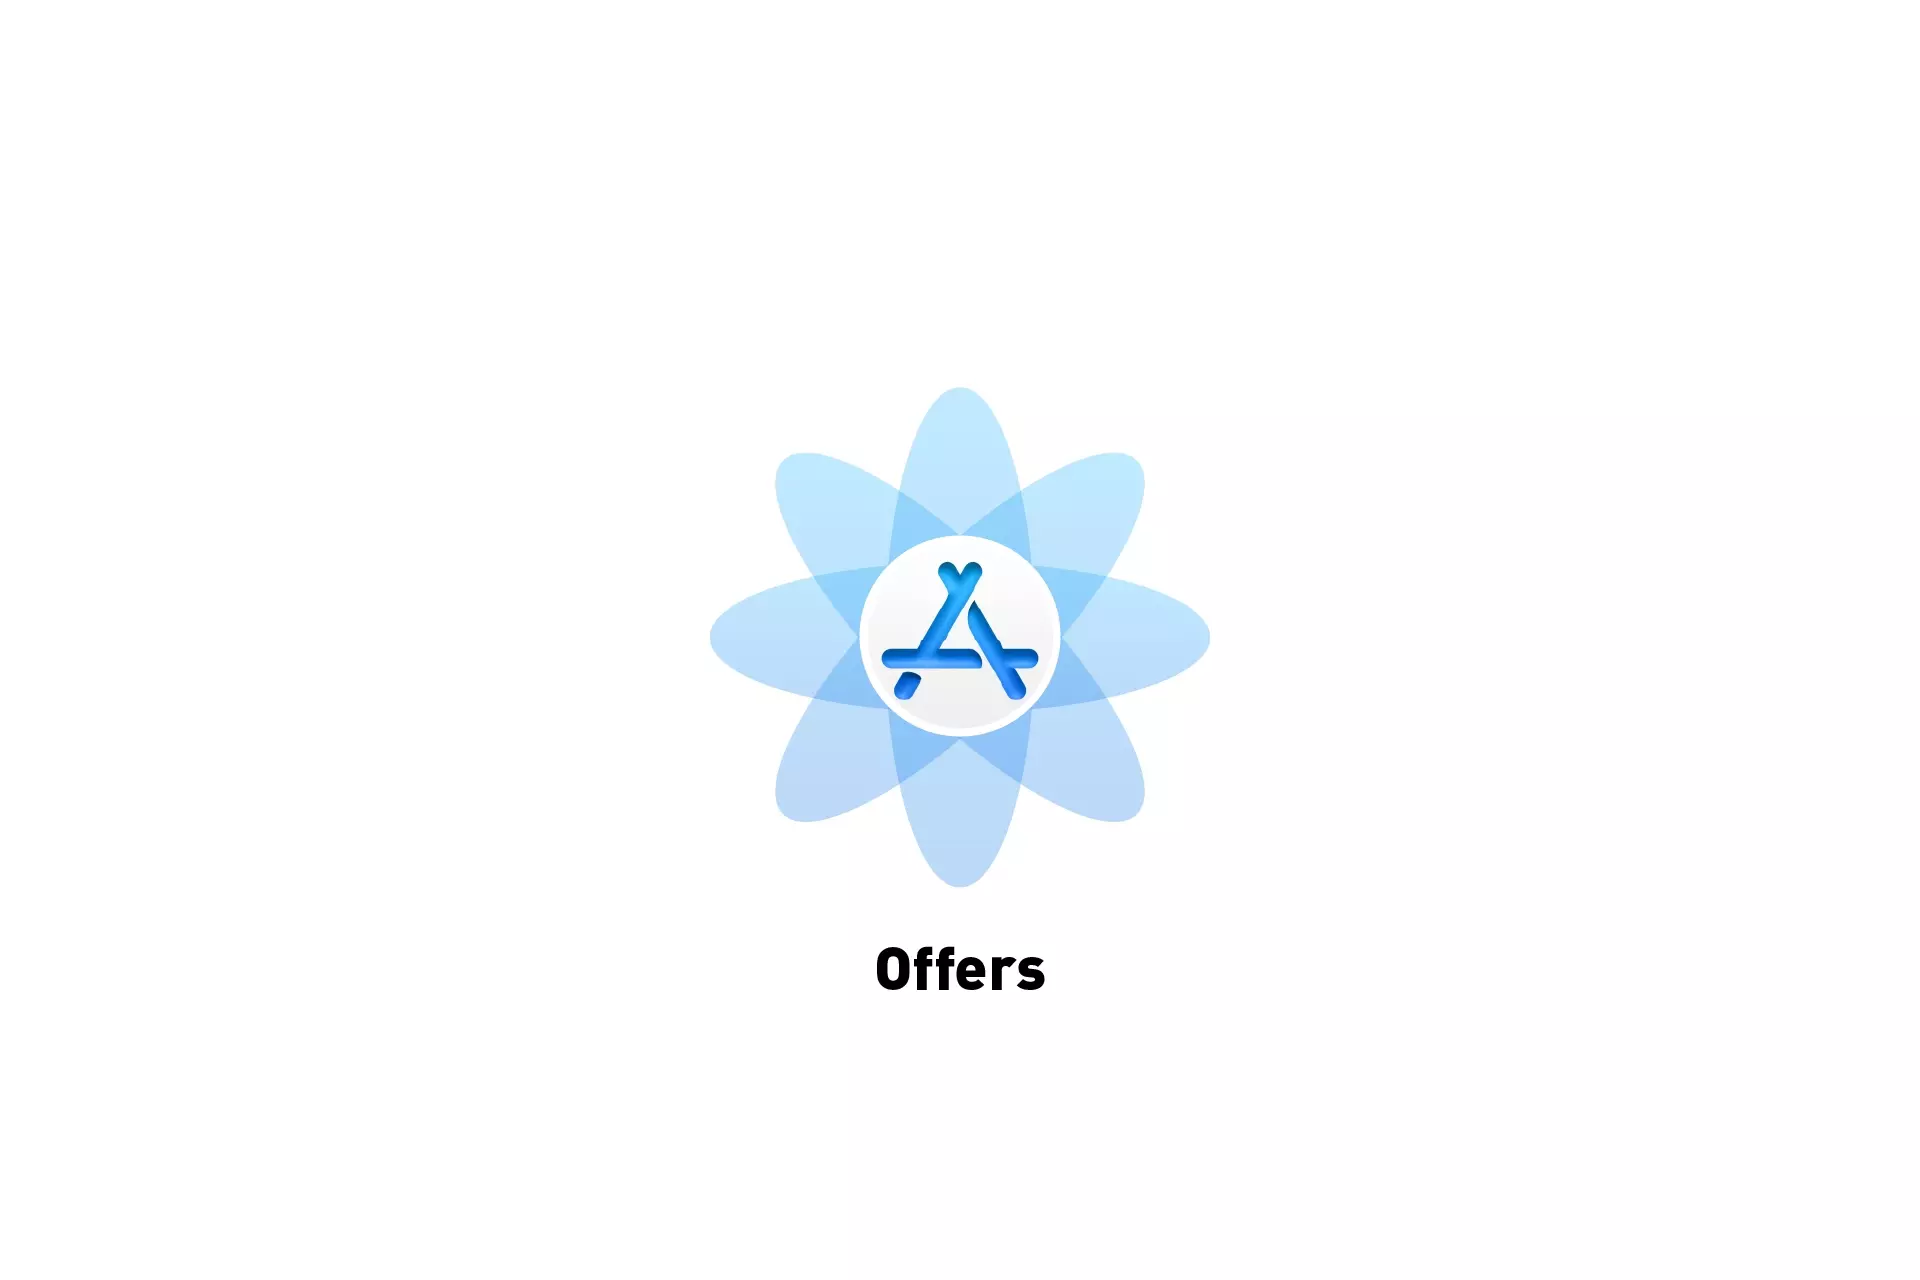 A flower that represents App Store Connect with the text "Offers" beneath it.